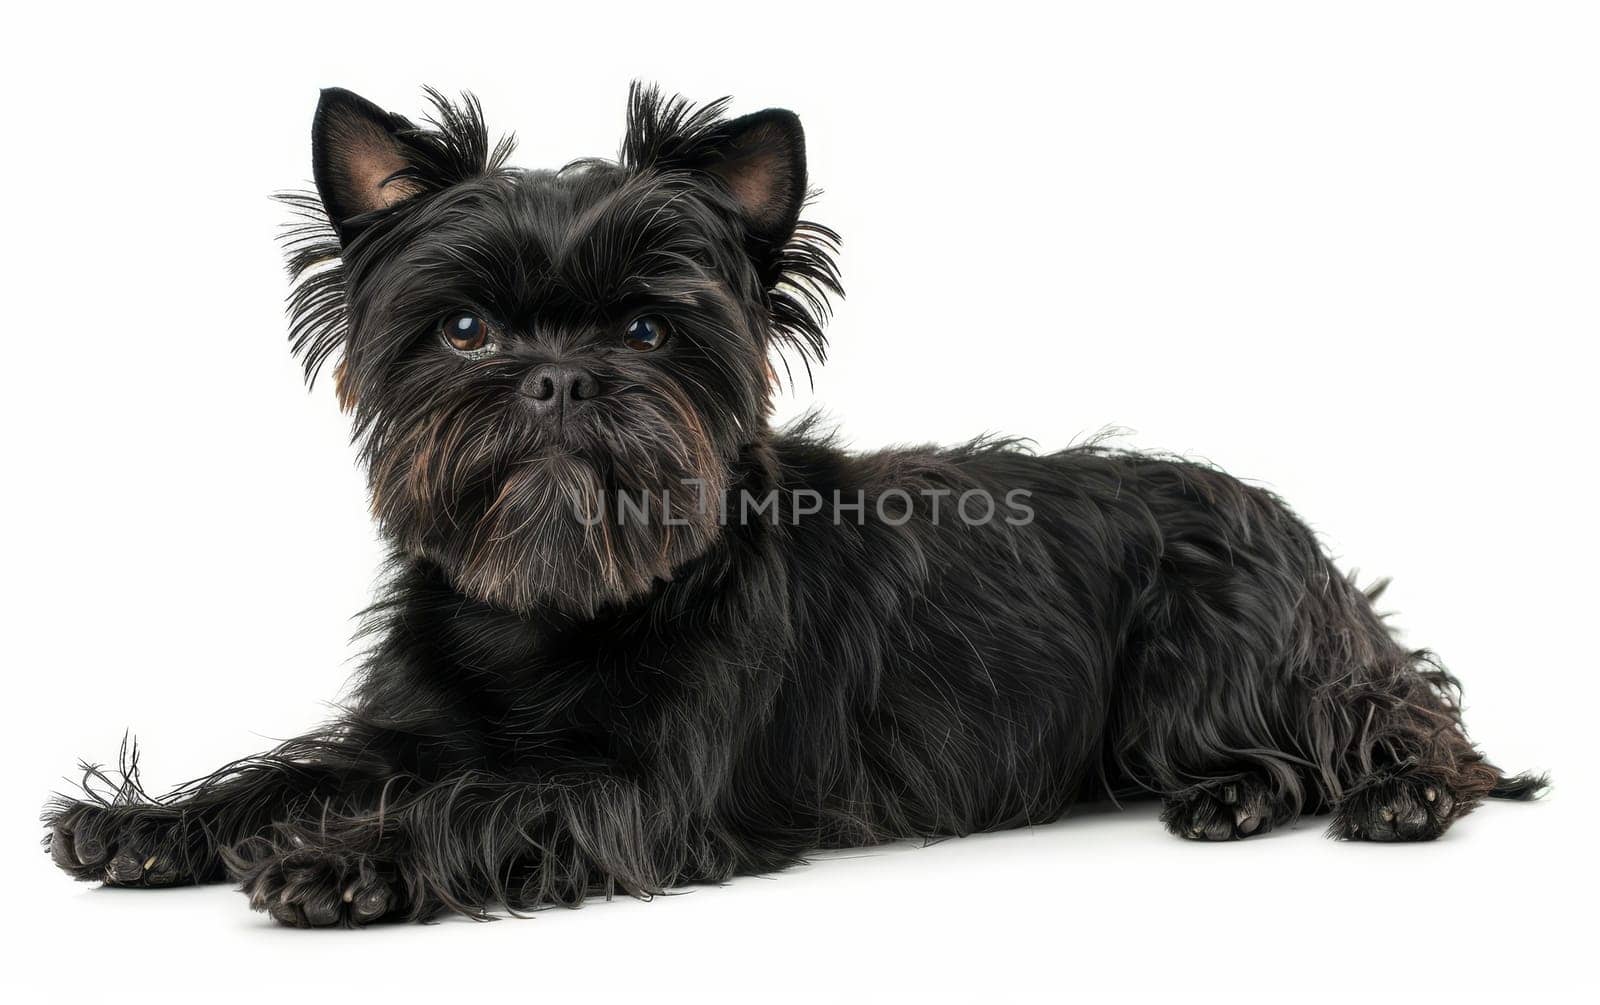 A small black Affenpinscher lies elegantly against a white background, its piercing gaze captivating the viewer. Its long, silky fur and distinguished beard give it a look of wise curiosity